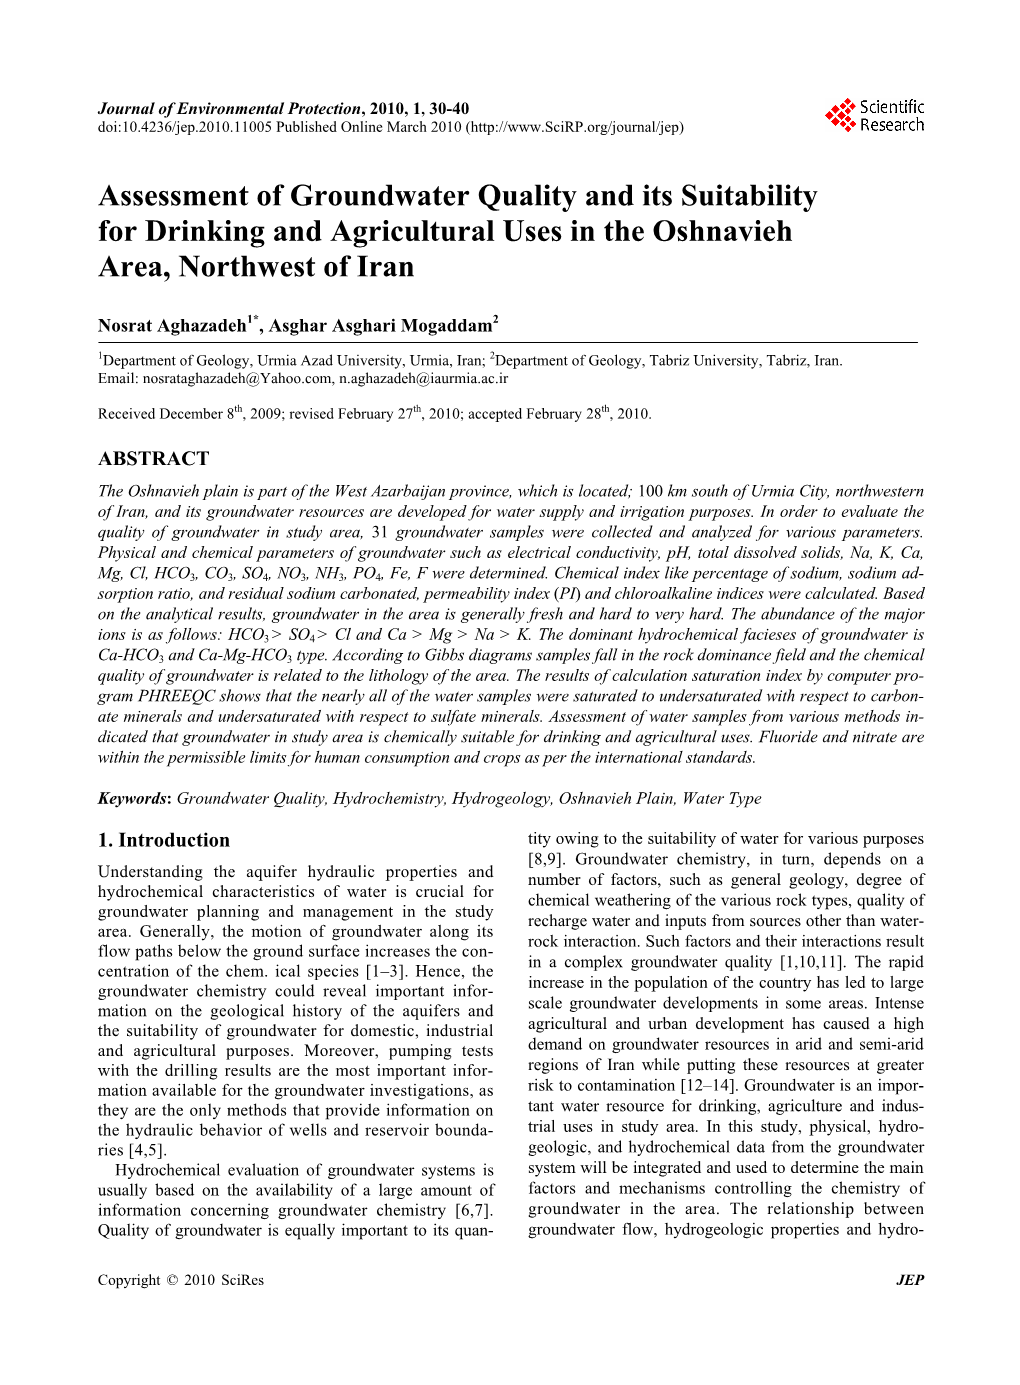 Assessment of Groundwater Quality and Its Suitability for Drinking and Agricultural Uses in the Oshnavieh Area, Northwest of Iran